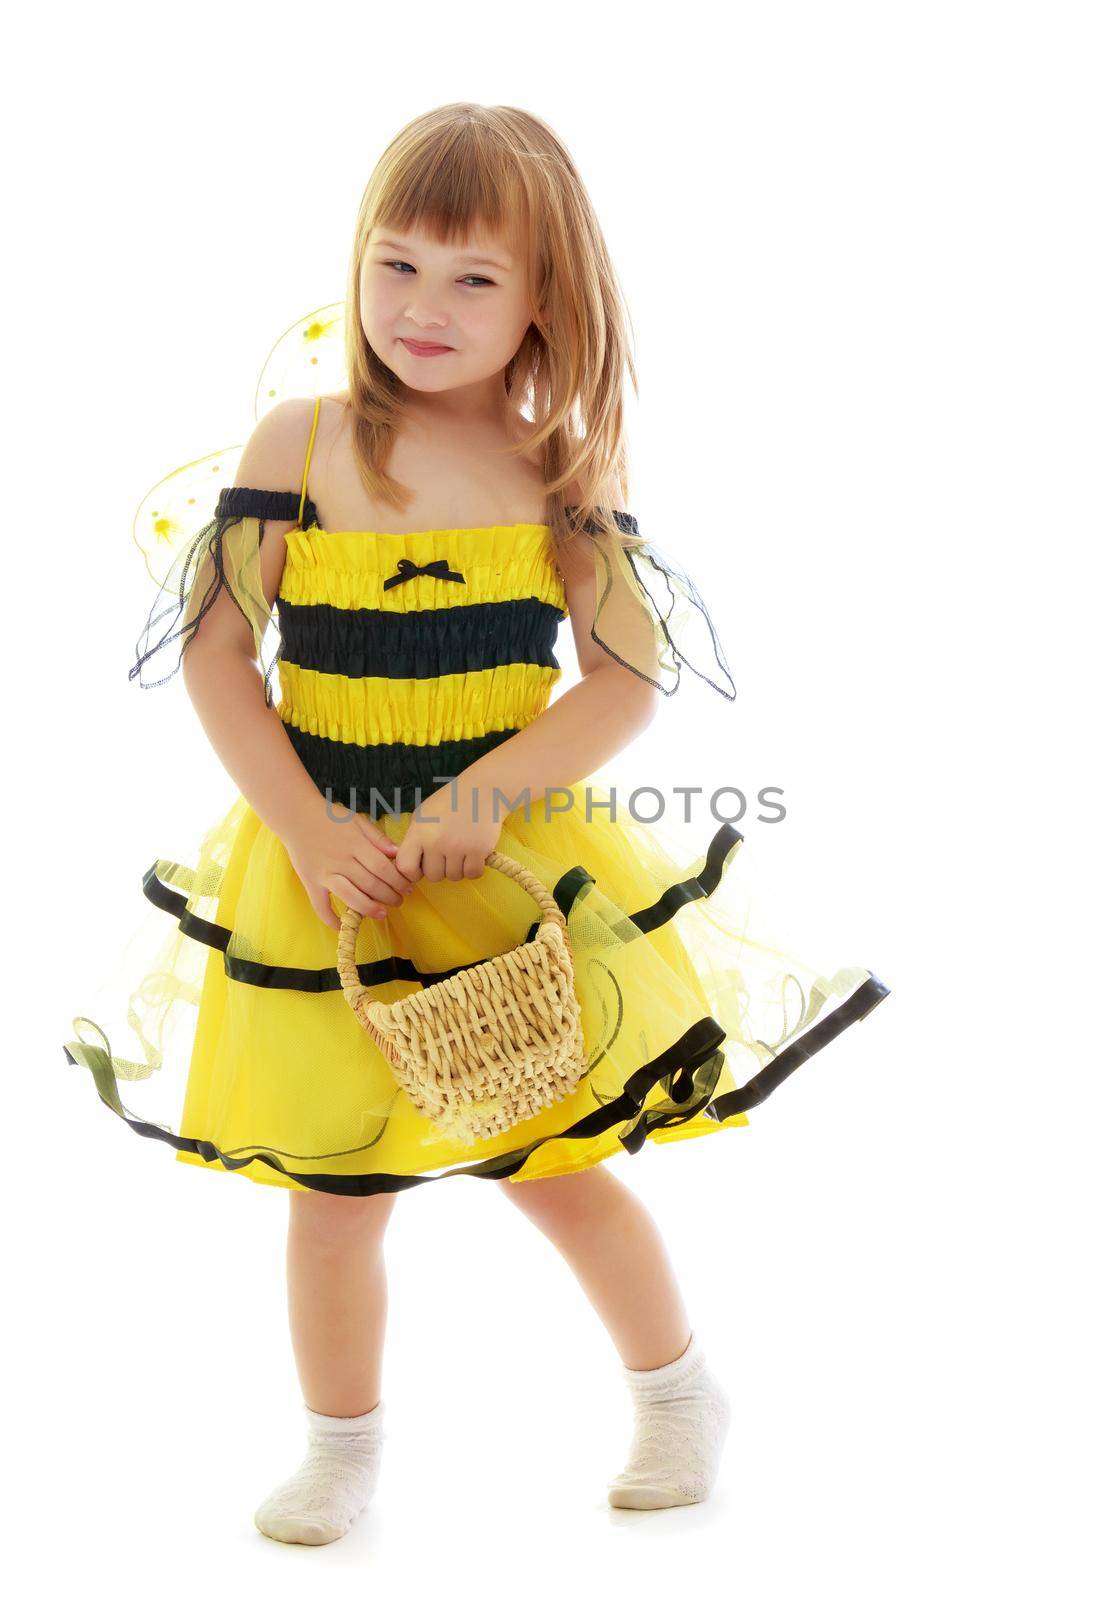 Beautiful little blonde girl in a black and yellow striped bee costume, holding a wicker basket.Isolated on white background.